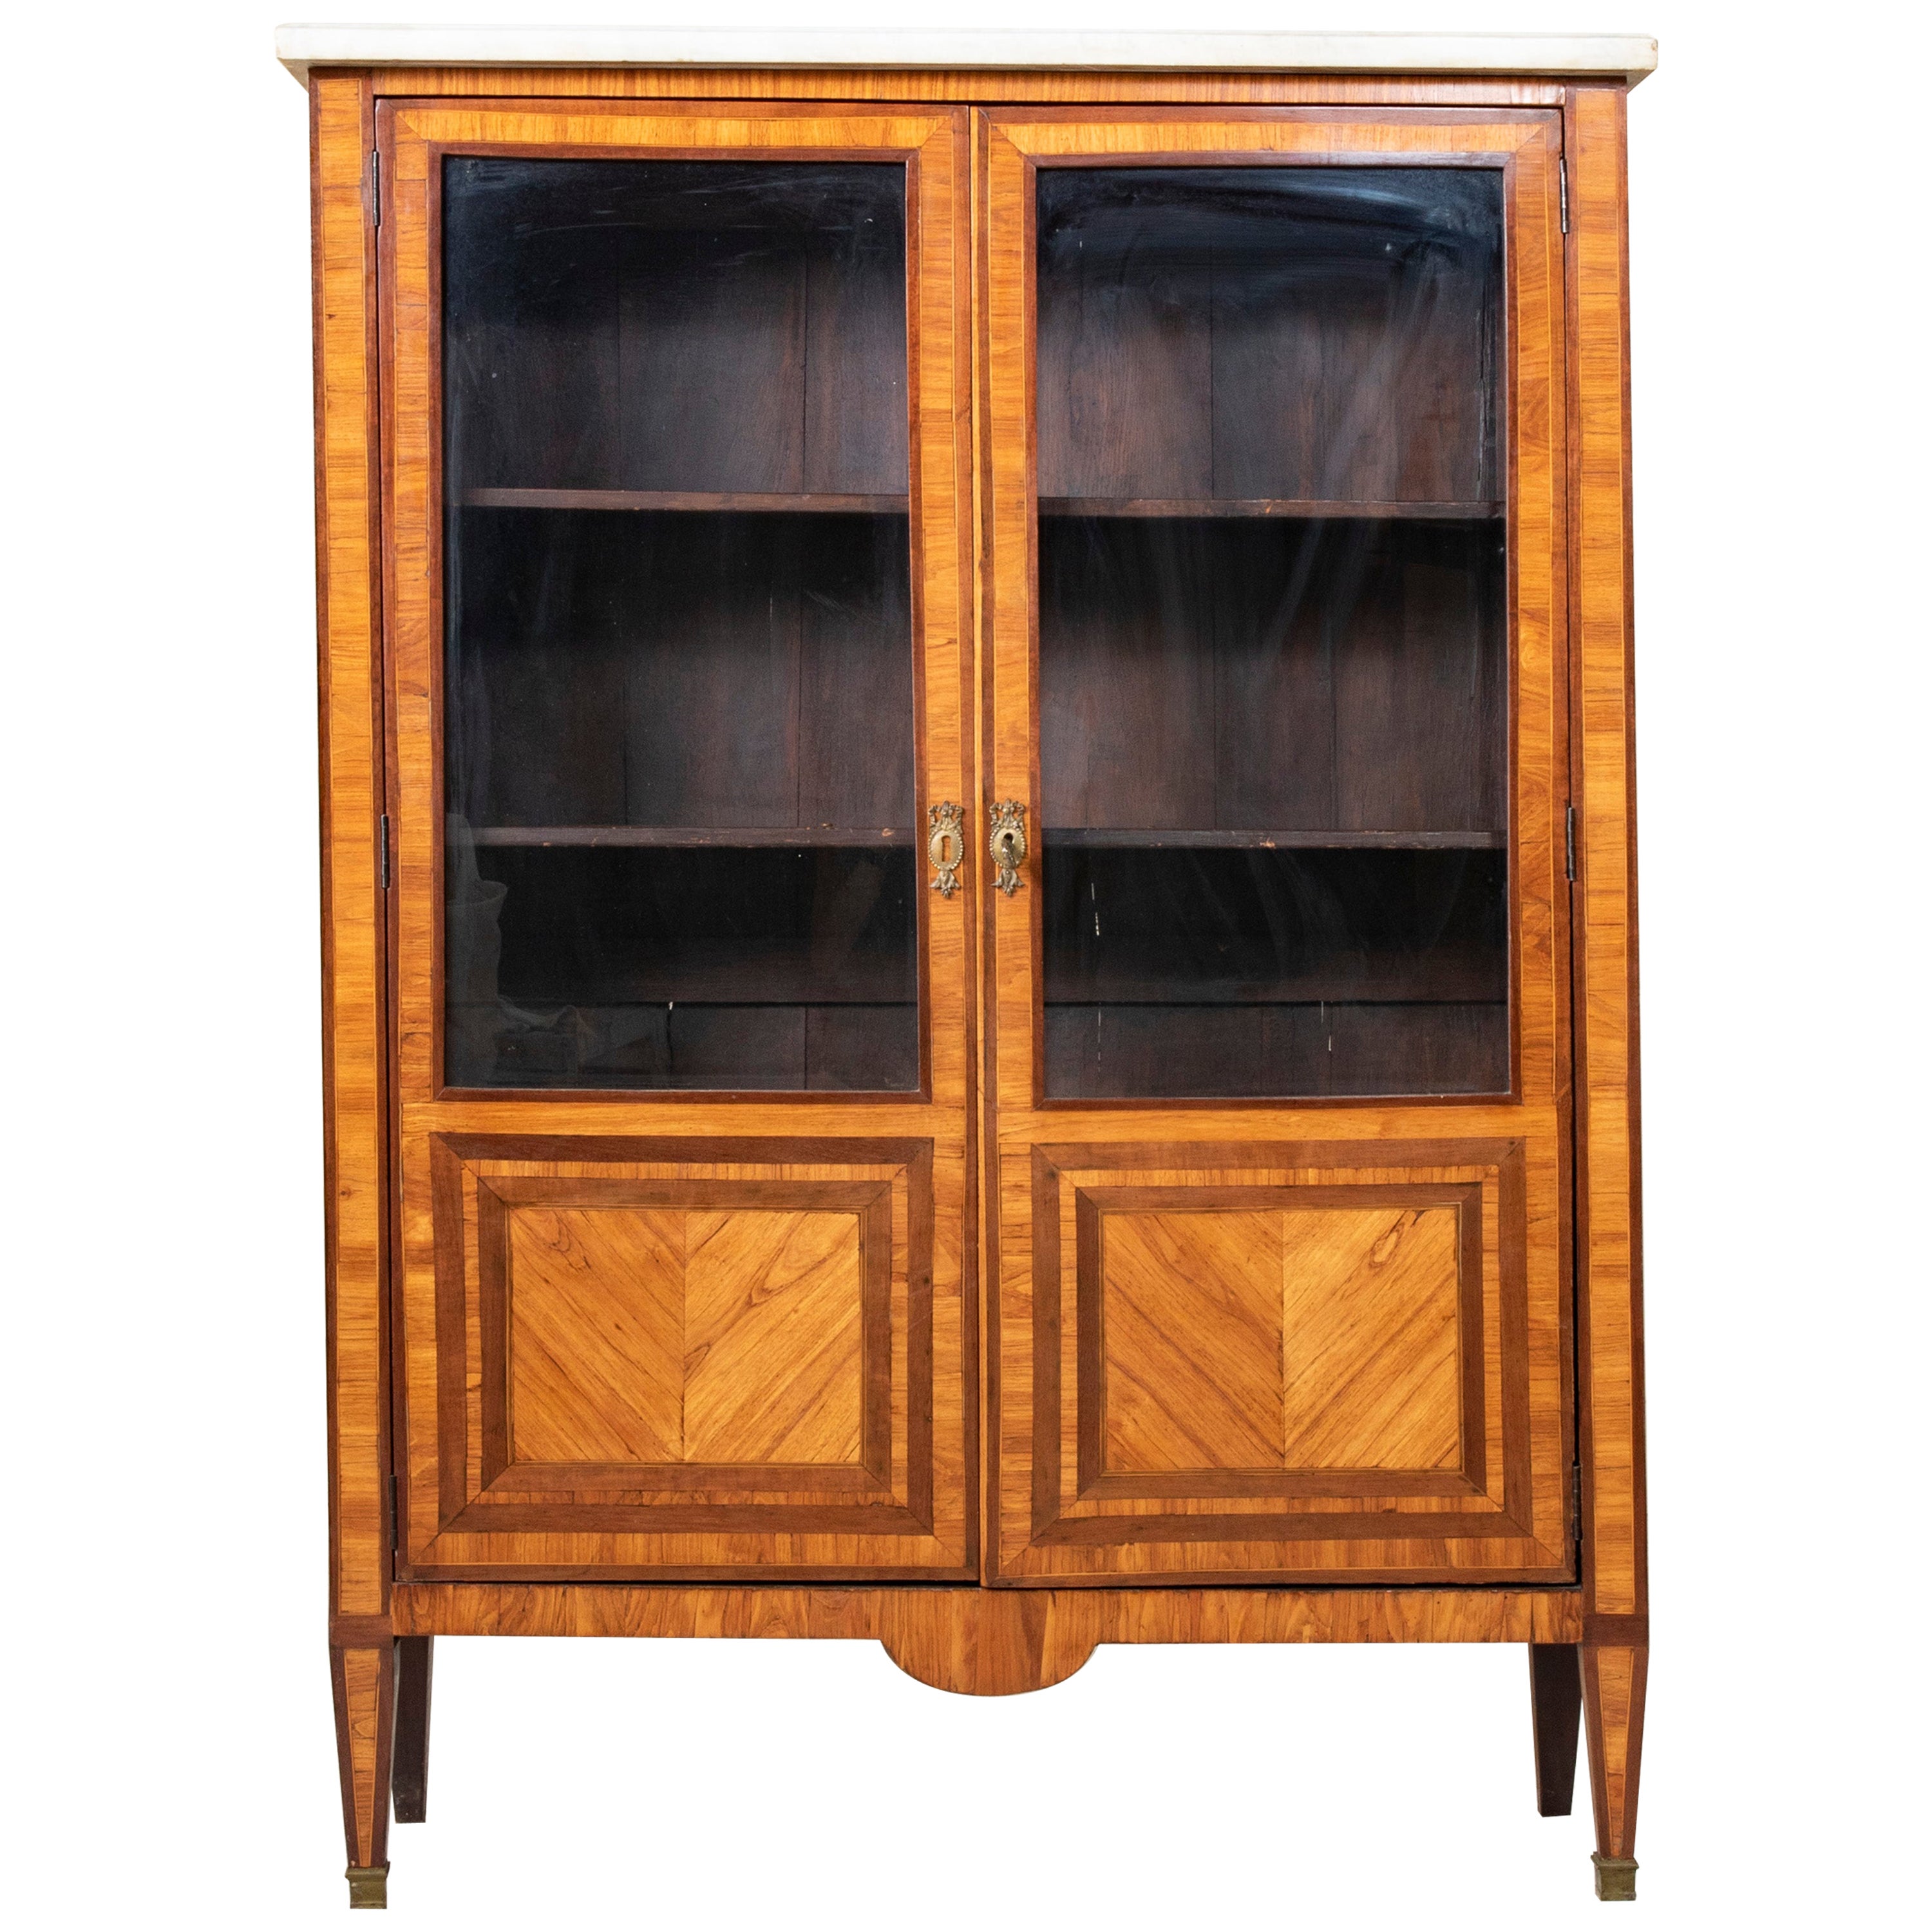 Late 18th Century French Louis XVI Period Marquetry Bookcase or Vitrine, Marble